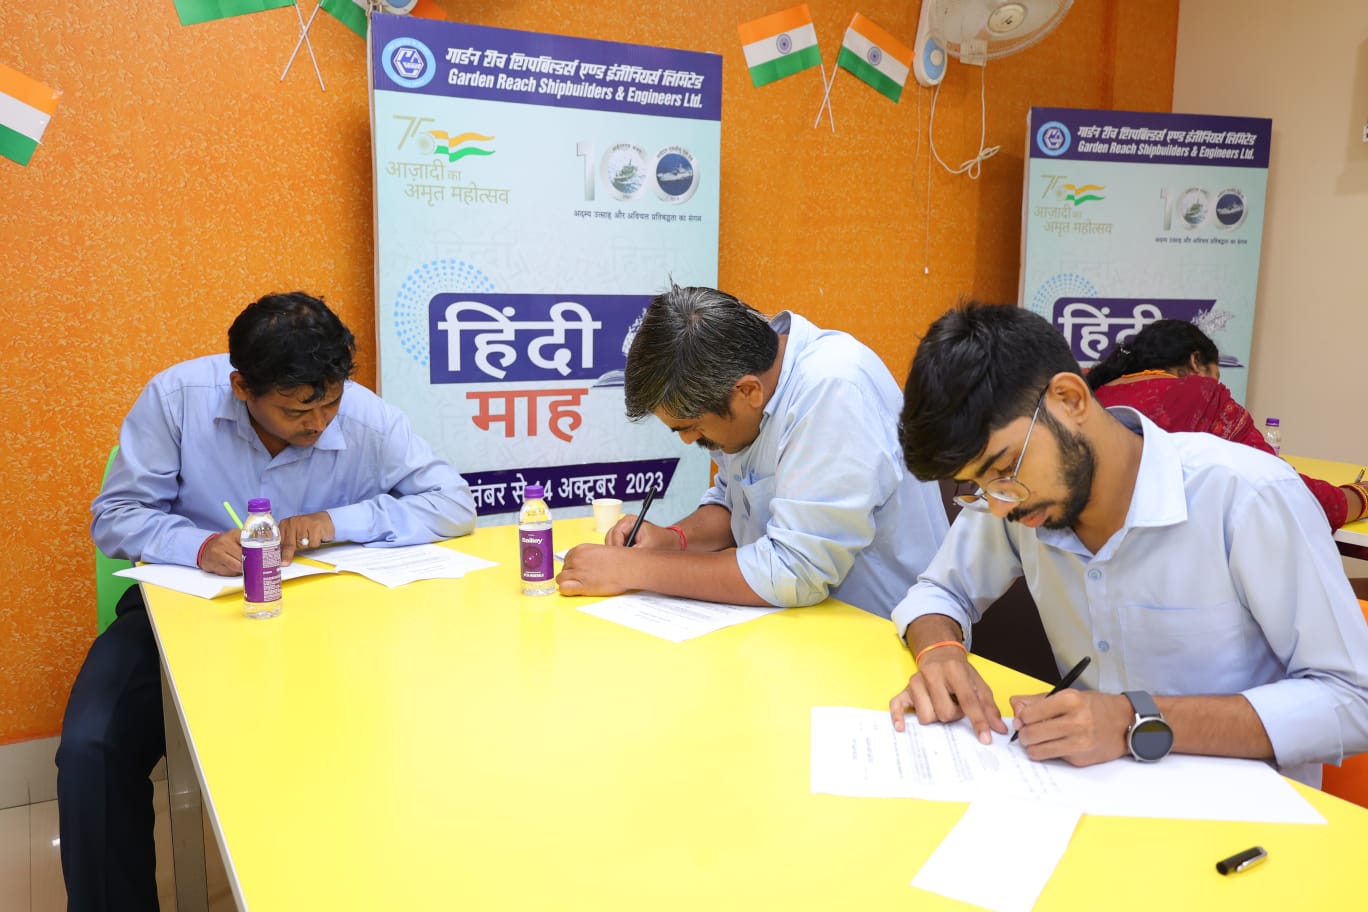 As part of Hindi Month 2023 Celebration, English to Hindi Translation competition organised in GRSE on 21 Sep 23